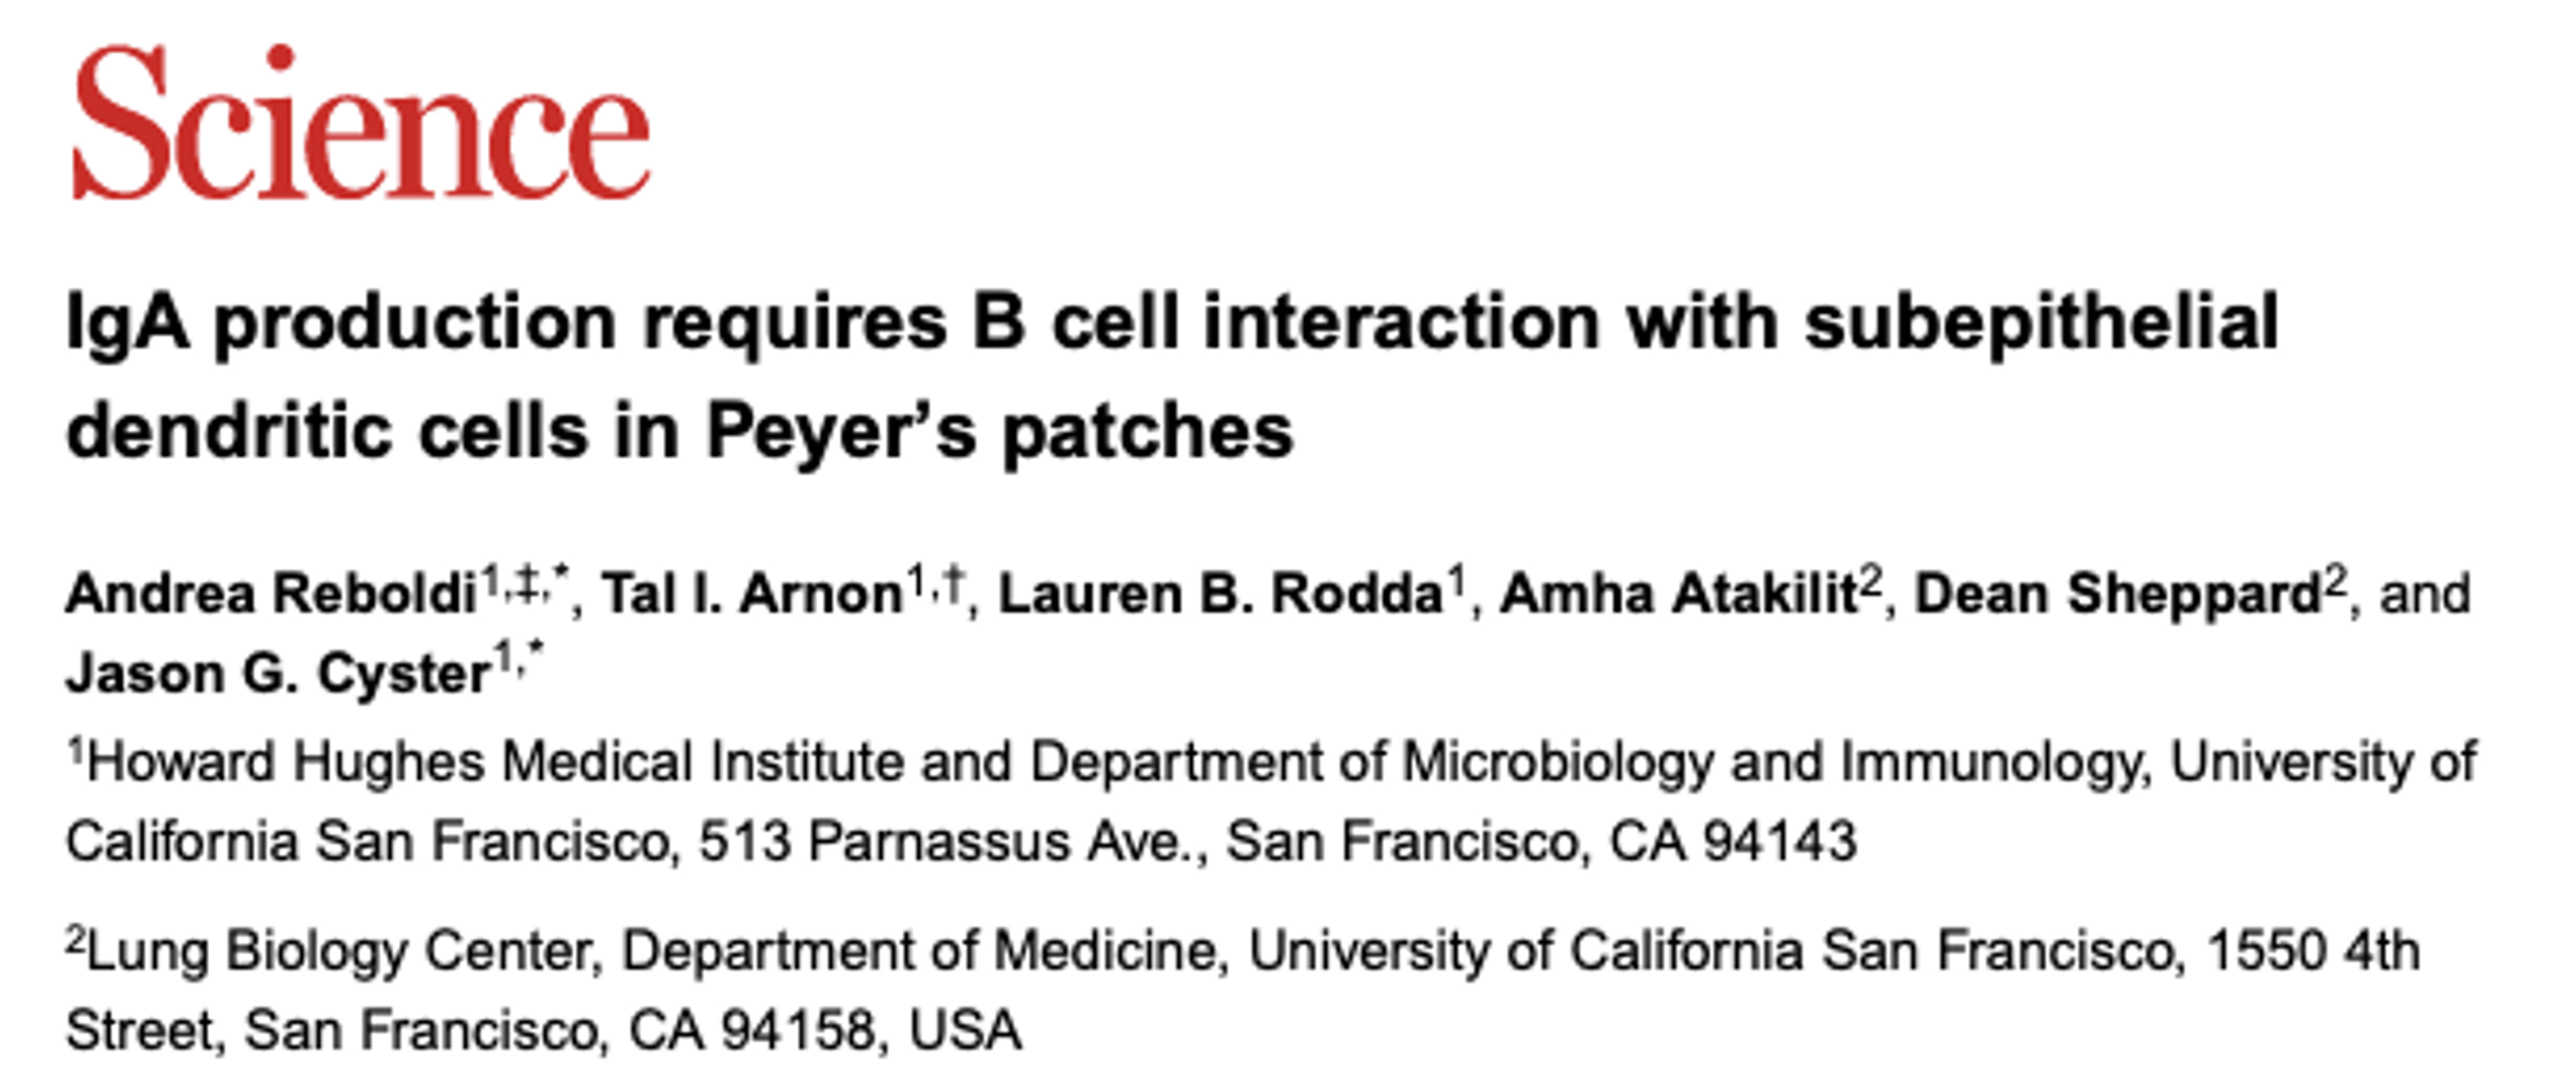 IgA production requires B cell interaction with subepithelial dendritic cells in Peyer’s patches